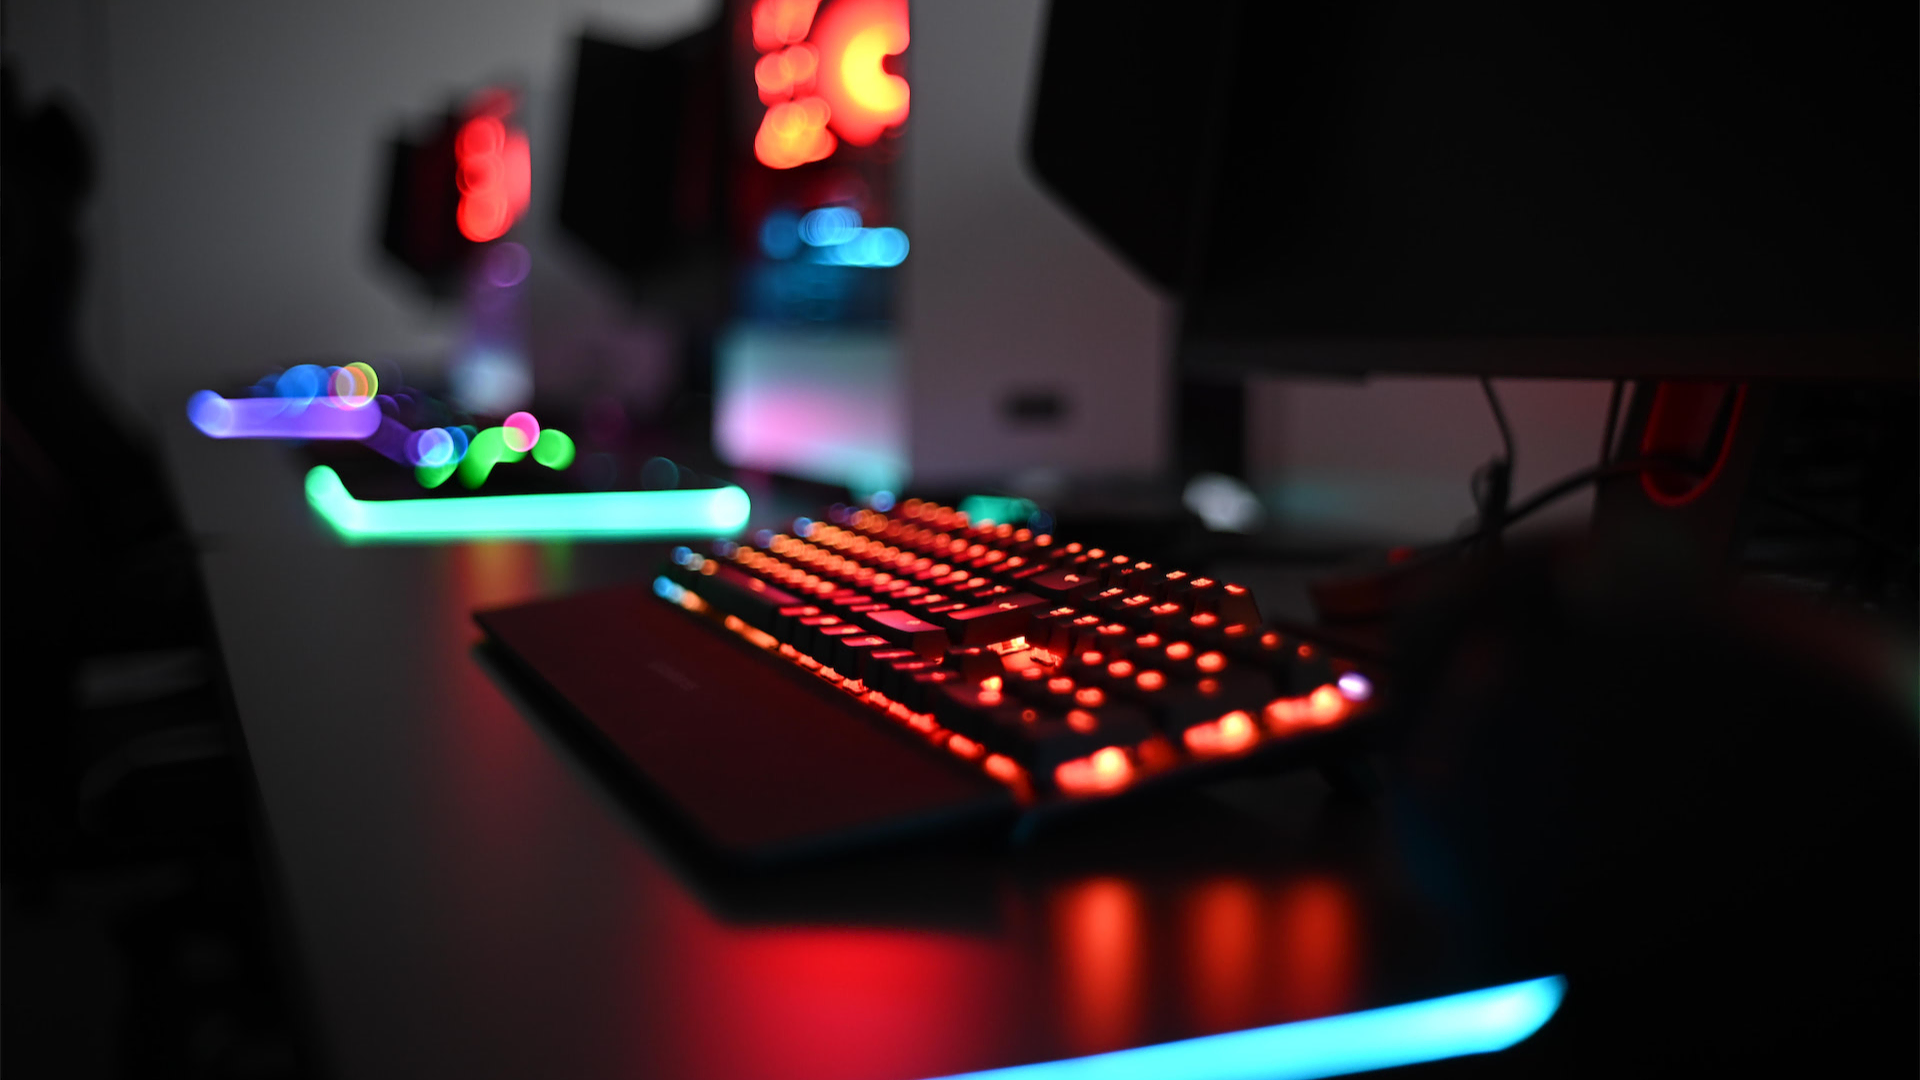 glowing keyboard infront of a computer monitor